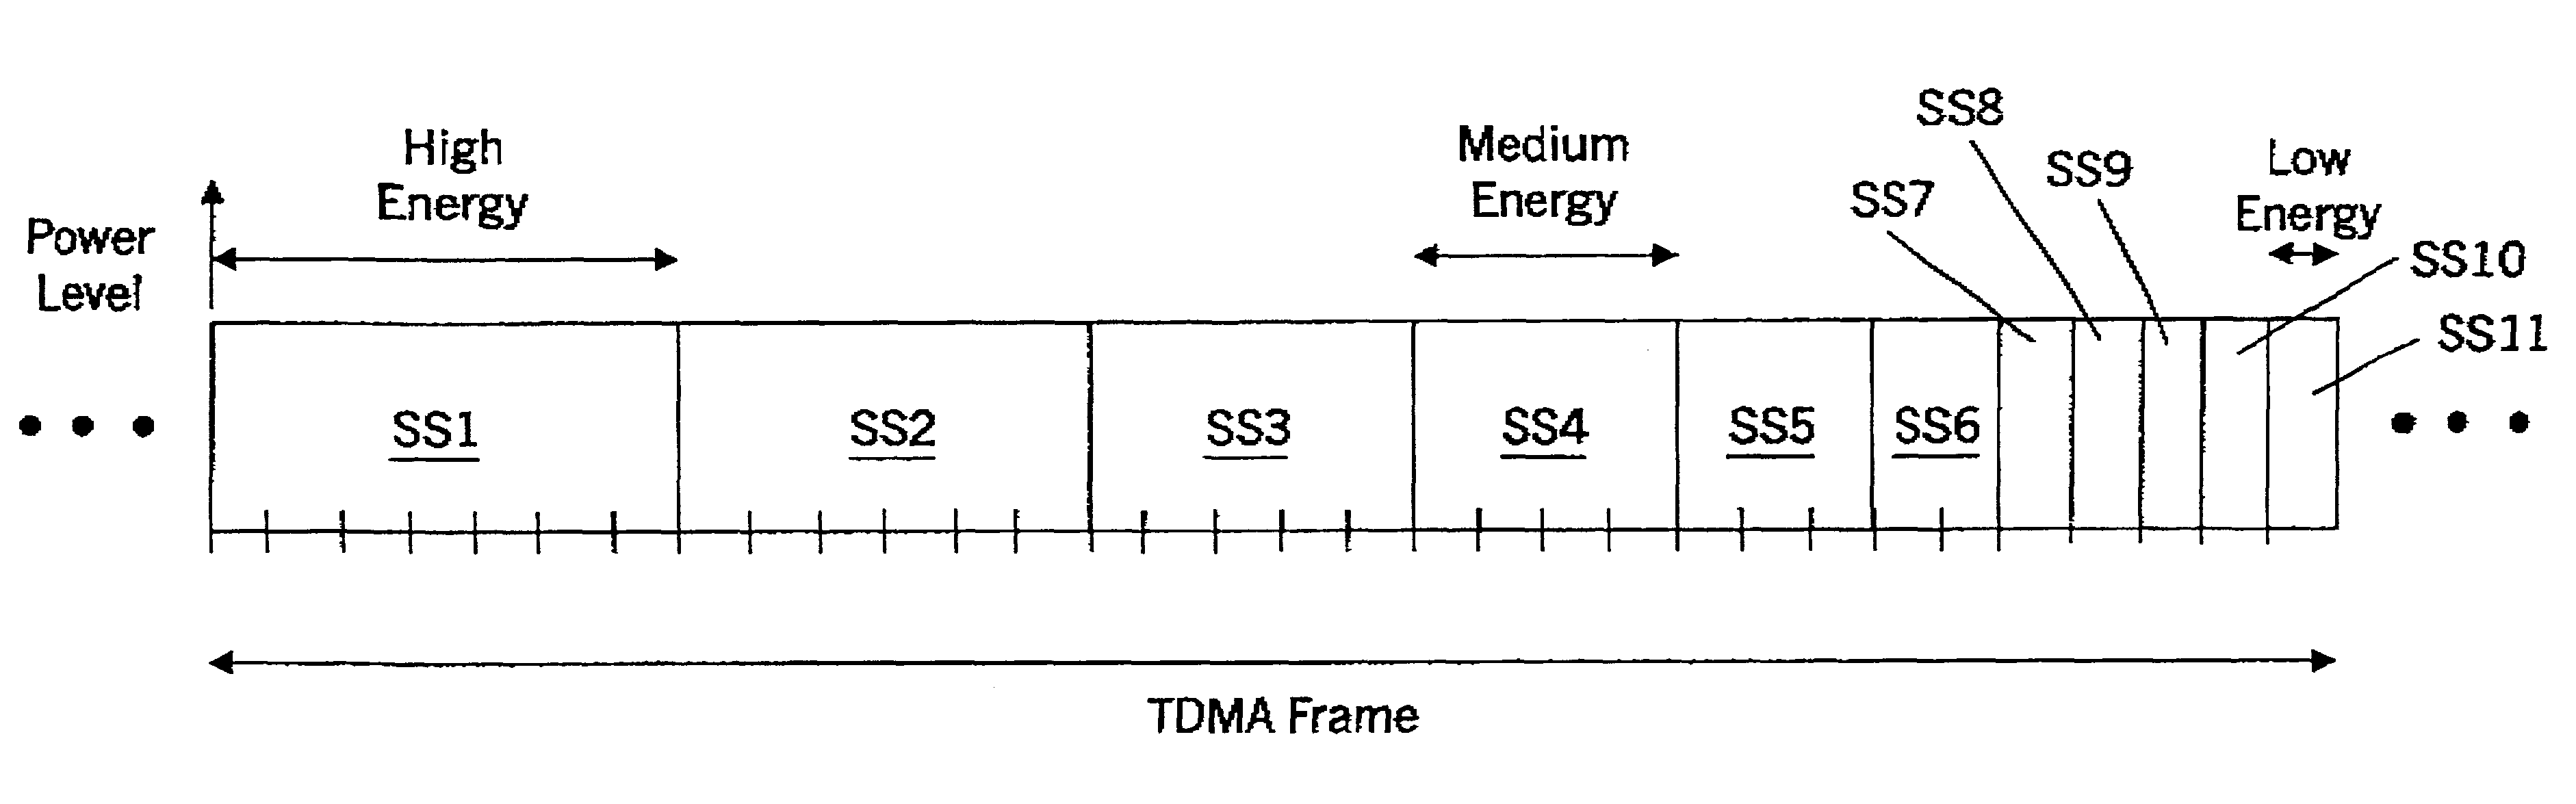 Methods for wirelessly communicating time division multiple access (TDMA) data using adaptive multiplexing and coding